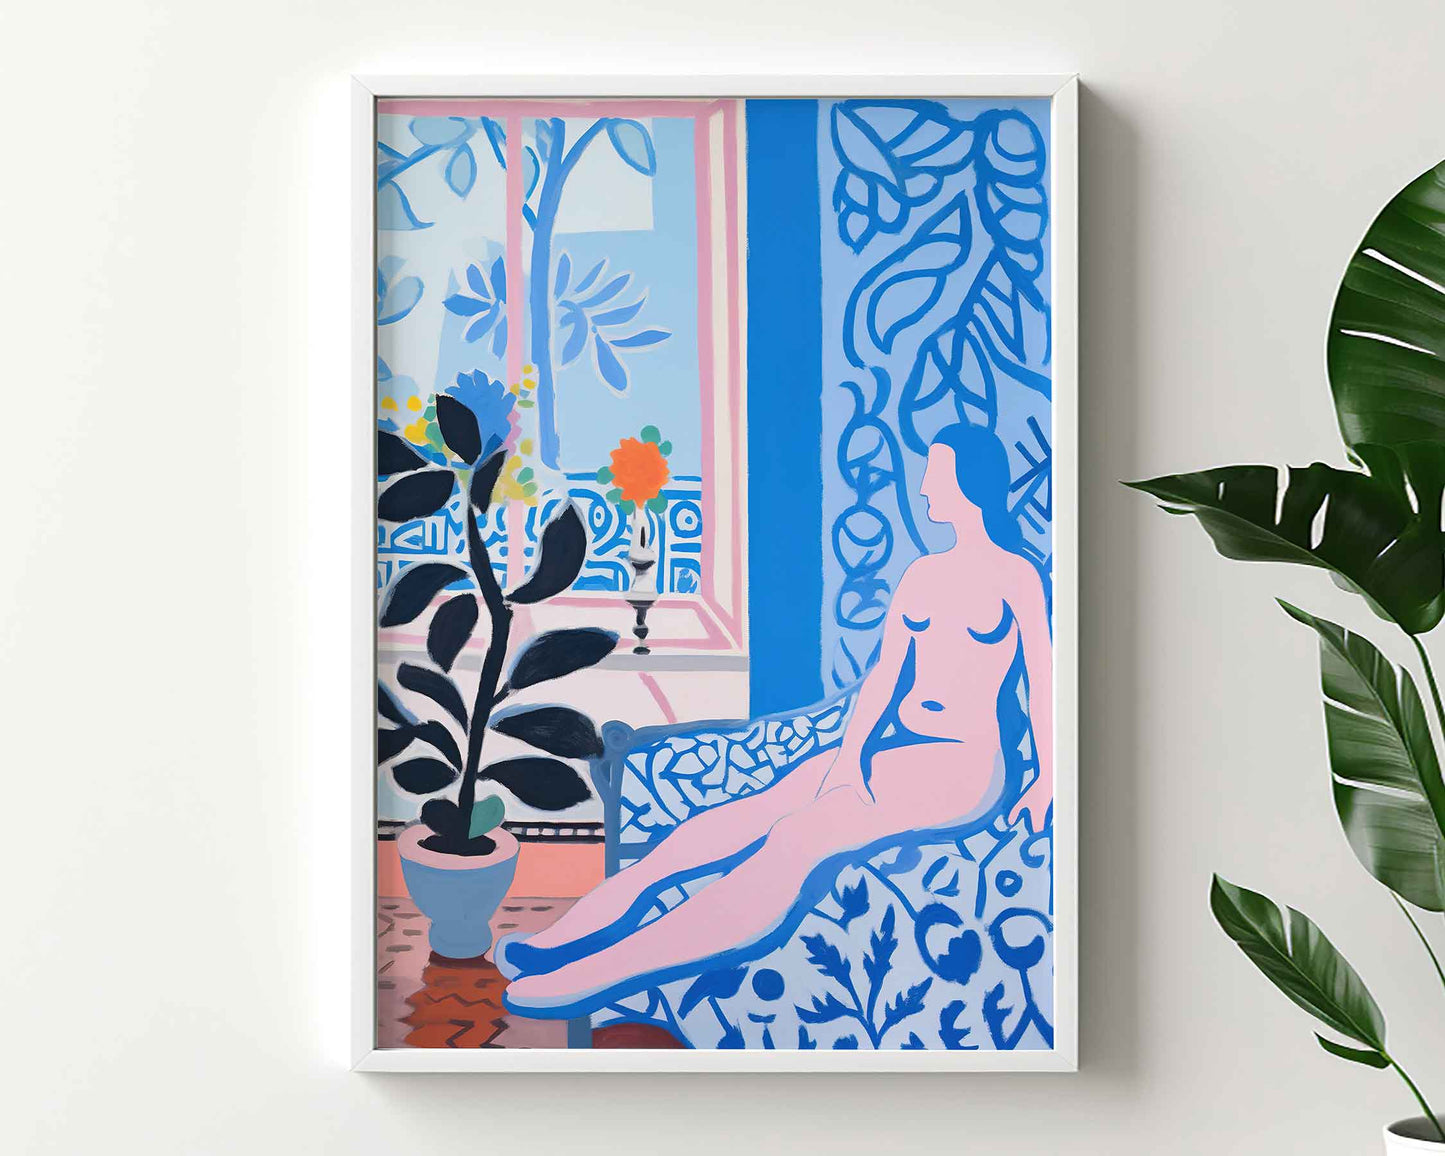 Framed Image of Matisse Art Style Print Blue Themed Wall Poster Oil Paintings